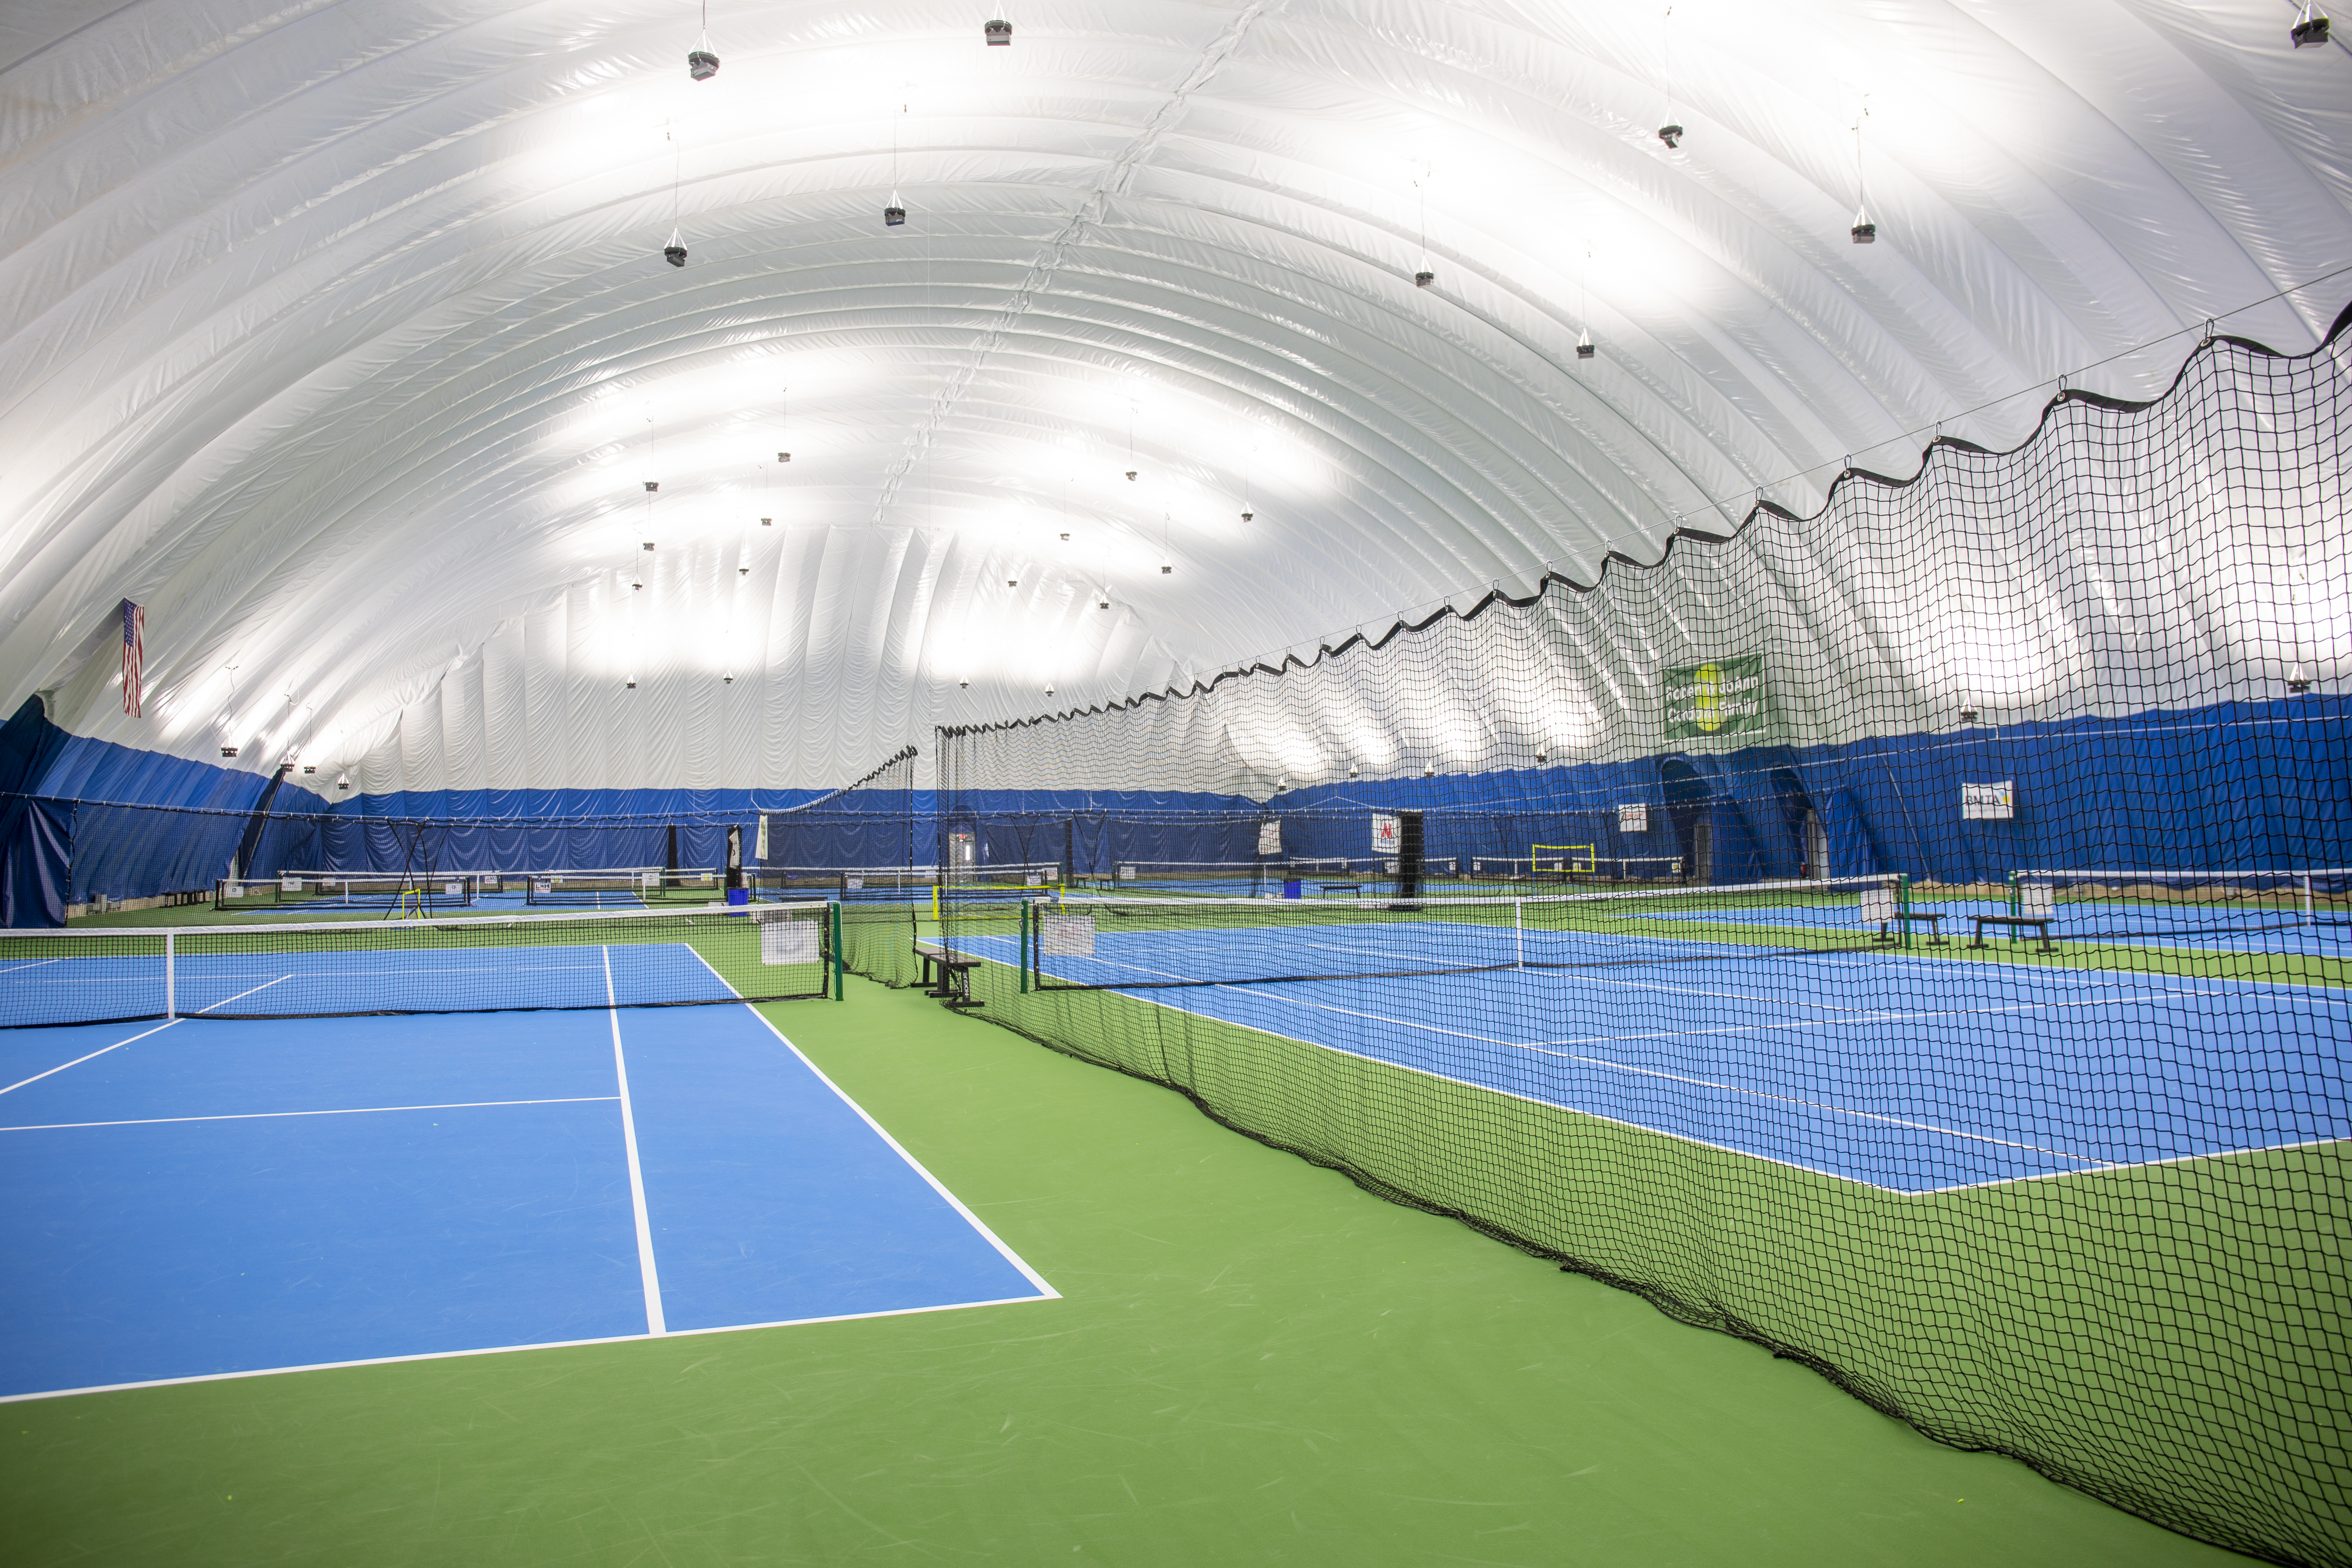 The dome provides year-round recreational opportunities for people of all ages. 